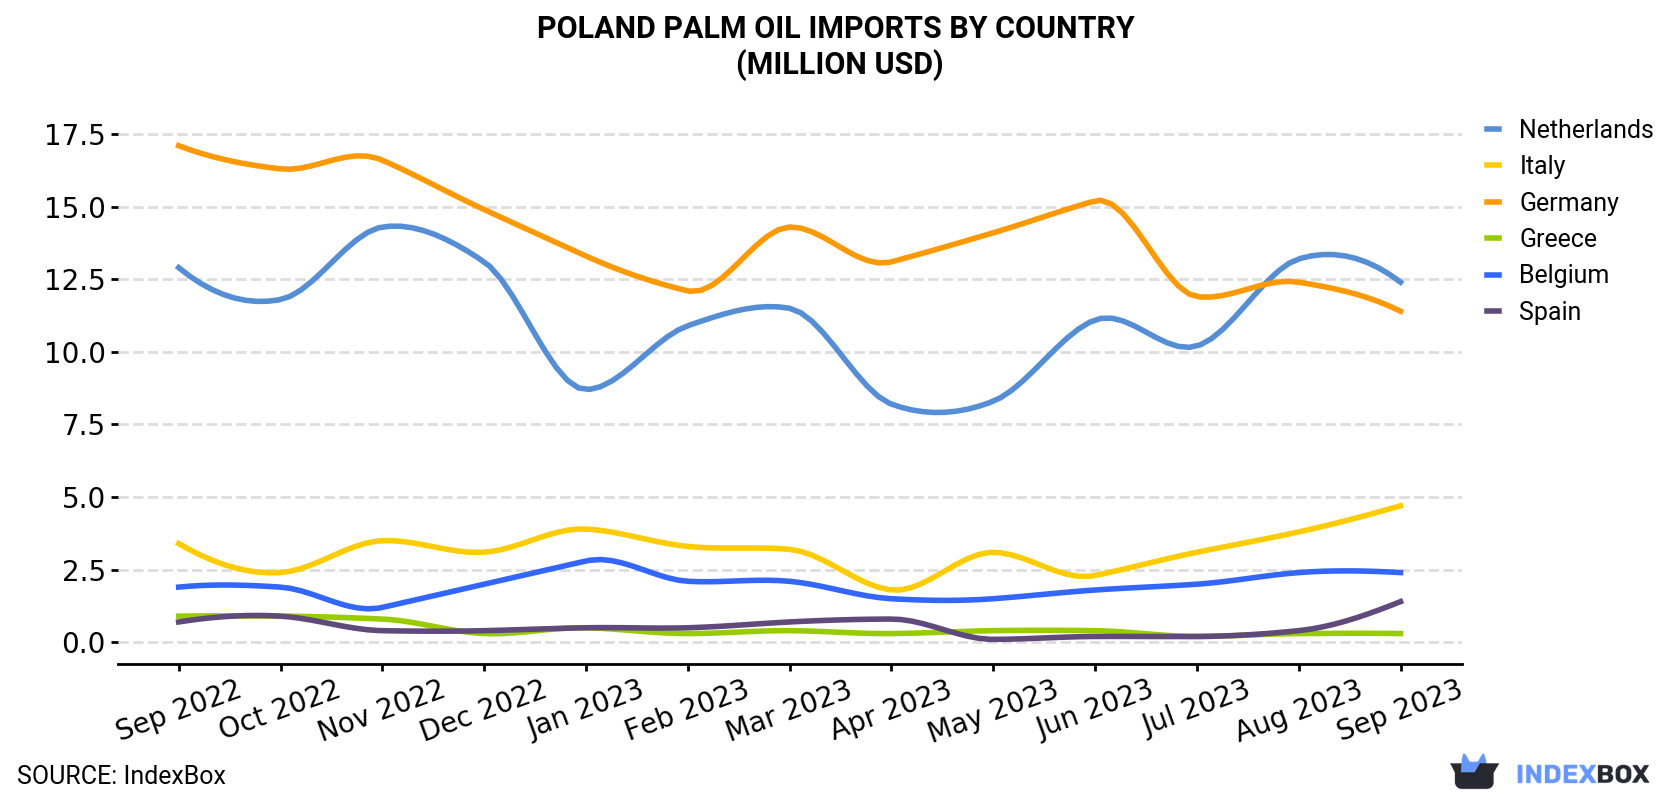 Poland Palm Oil Imports By Country (Million USD)